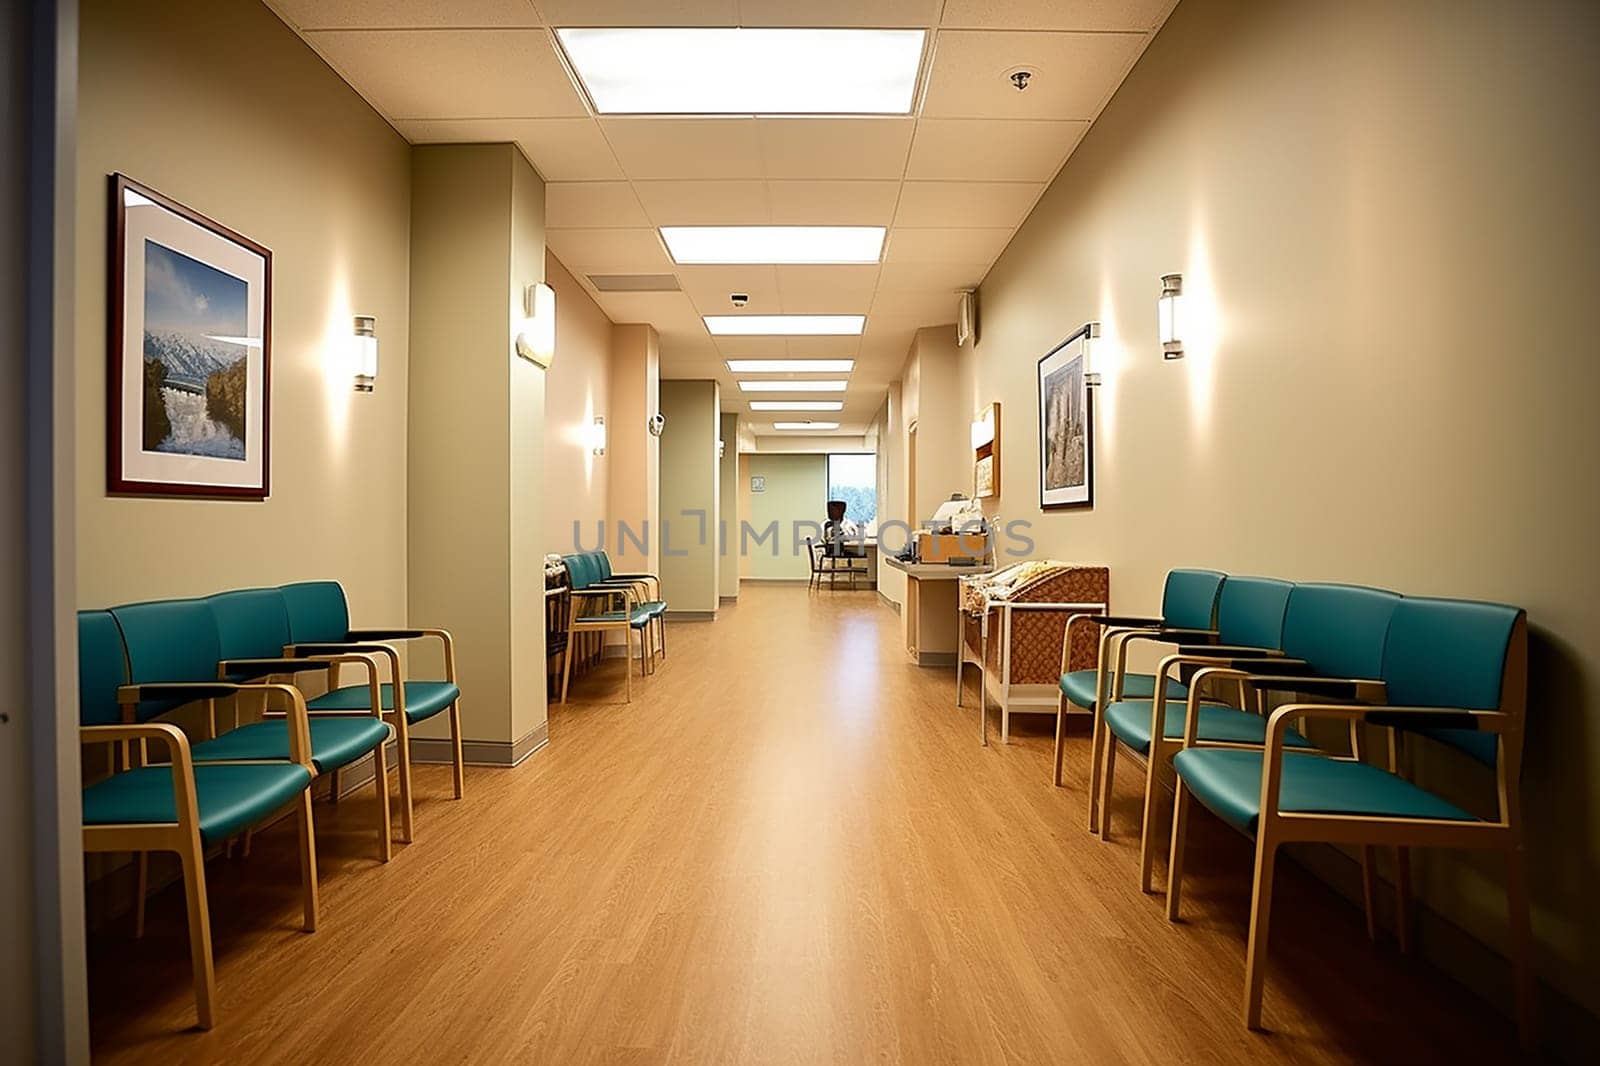 An hospital waiting room with blue chairs and paintings on the wall. The room is empty and the lights are on